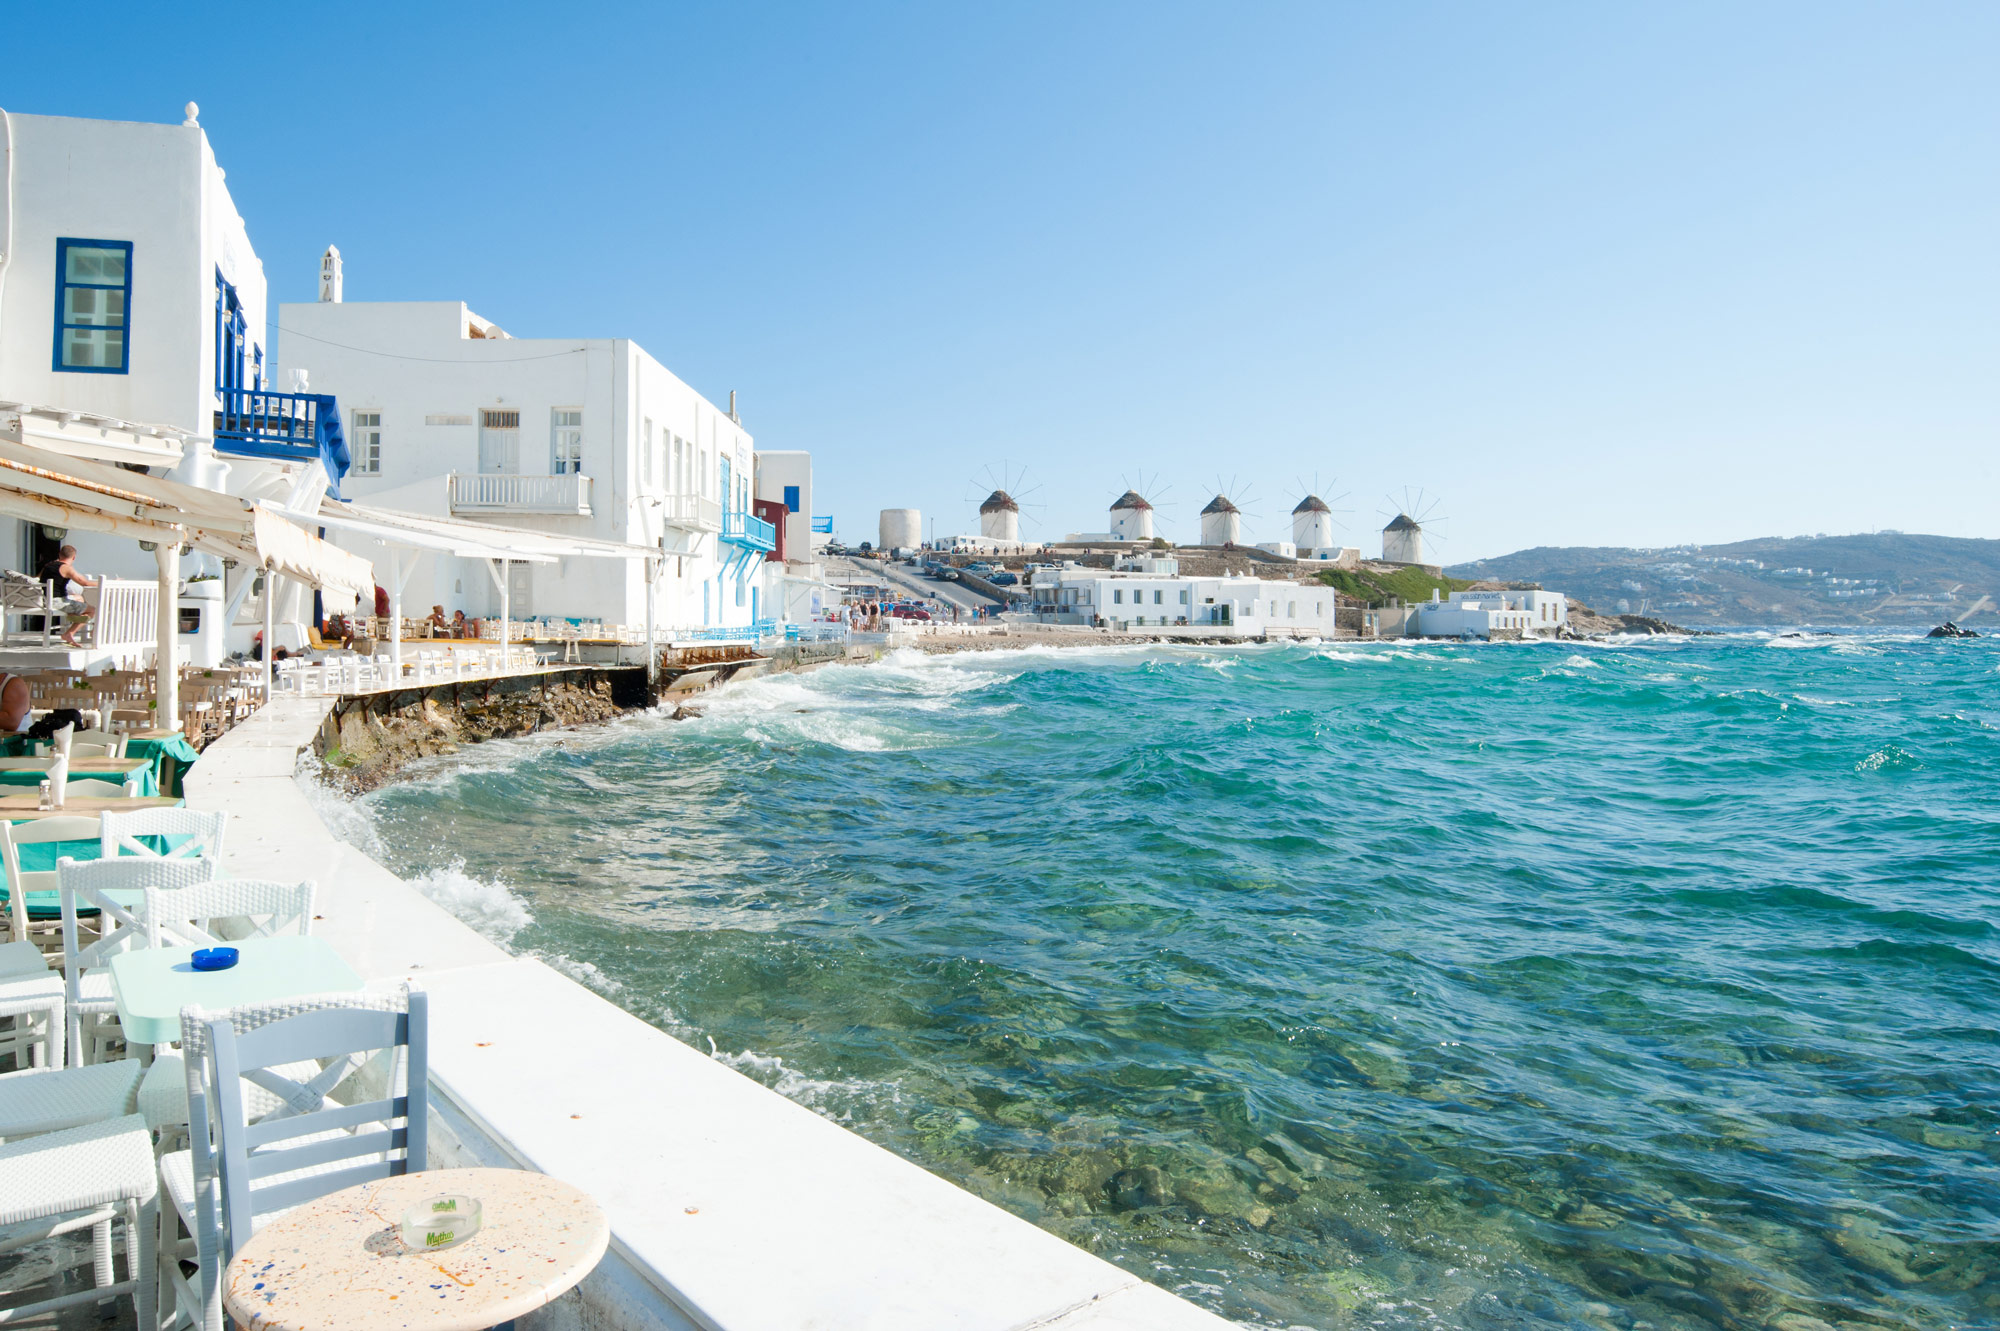 Magic view suites Mykonos-Vivestia | Risk-Free Villas, Hotels and Cruises in VR